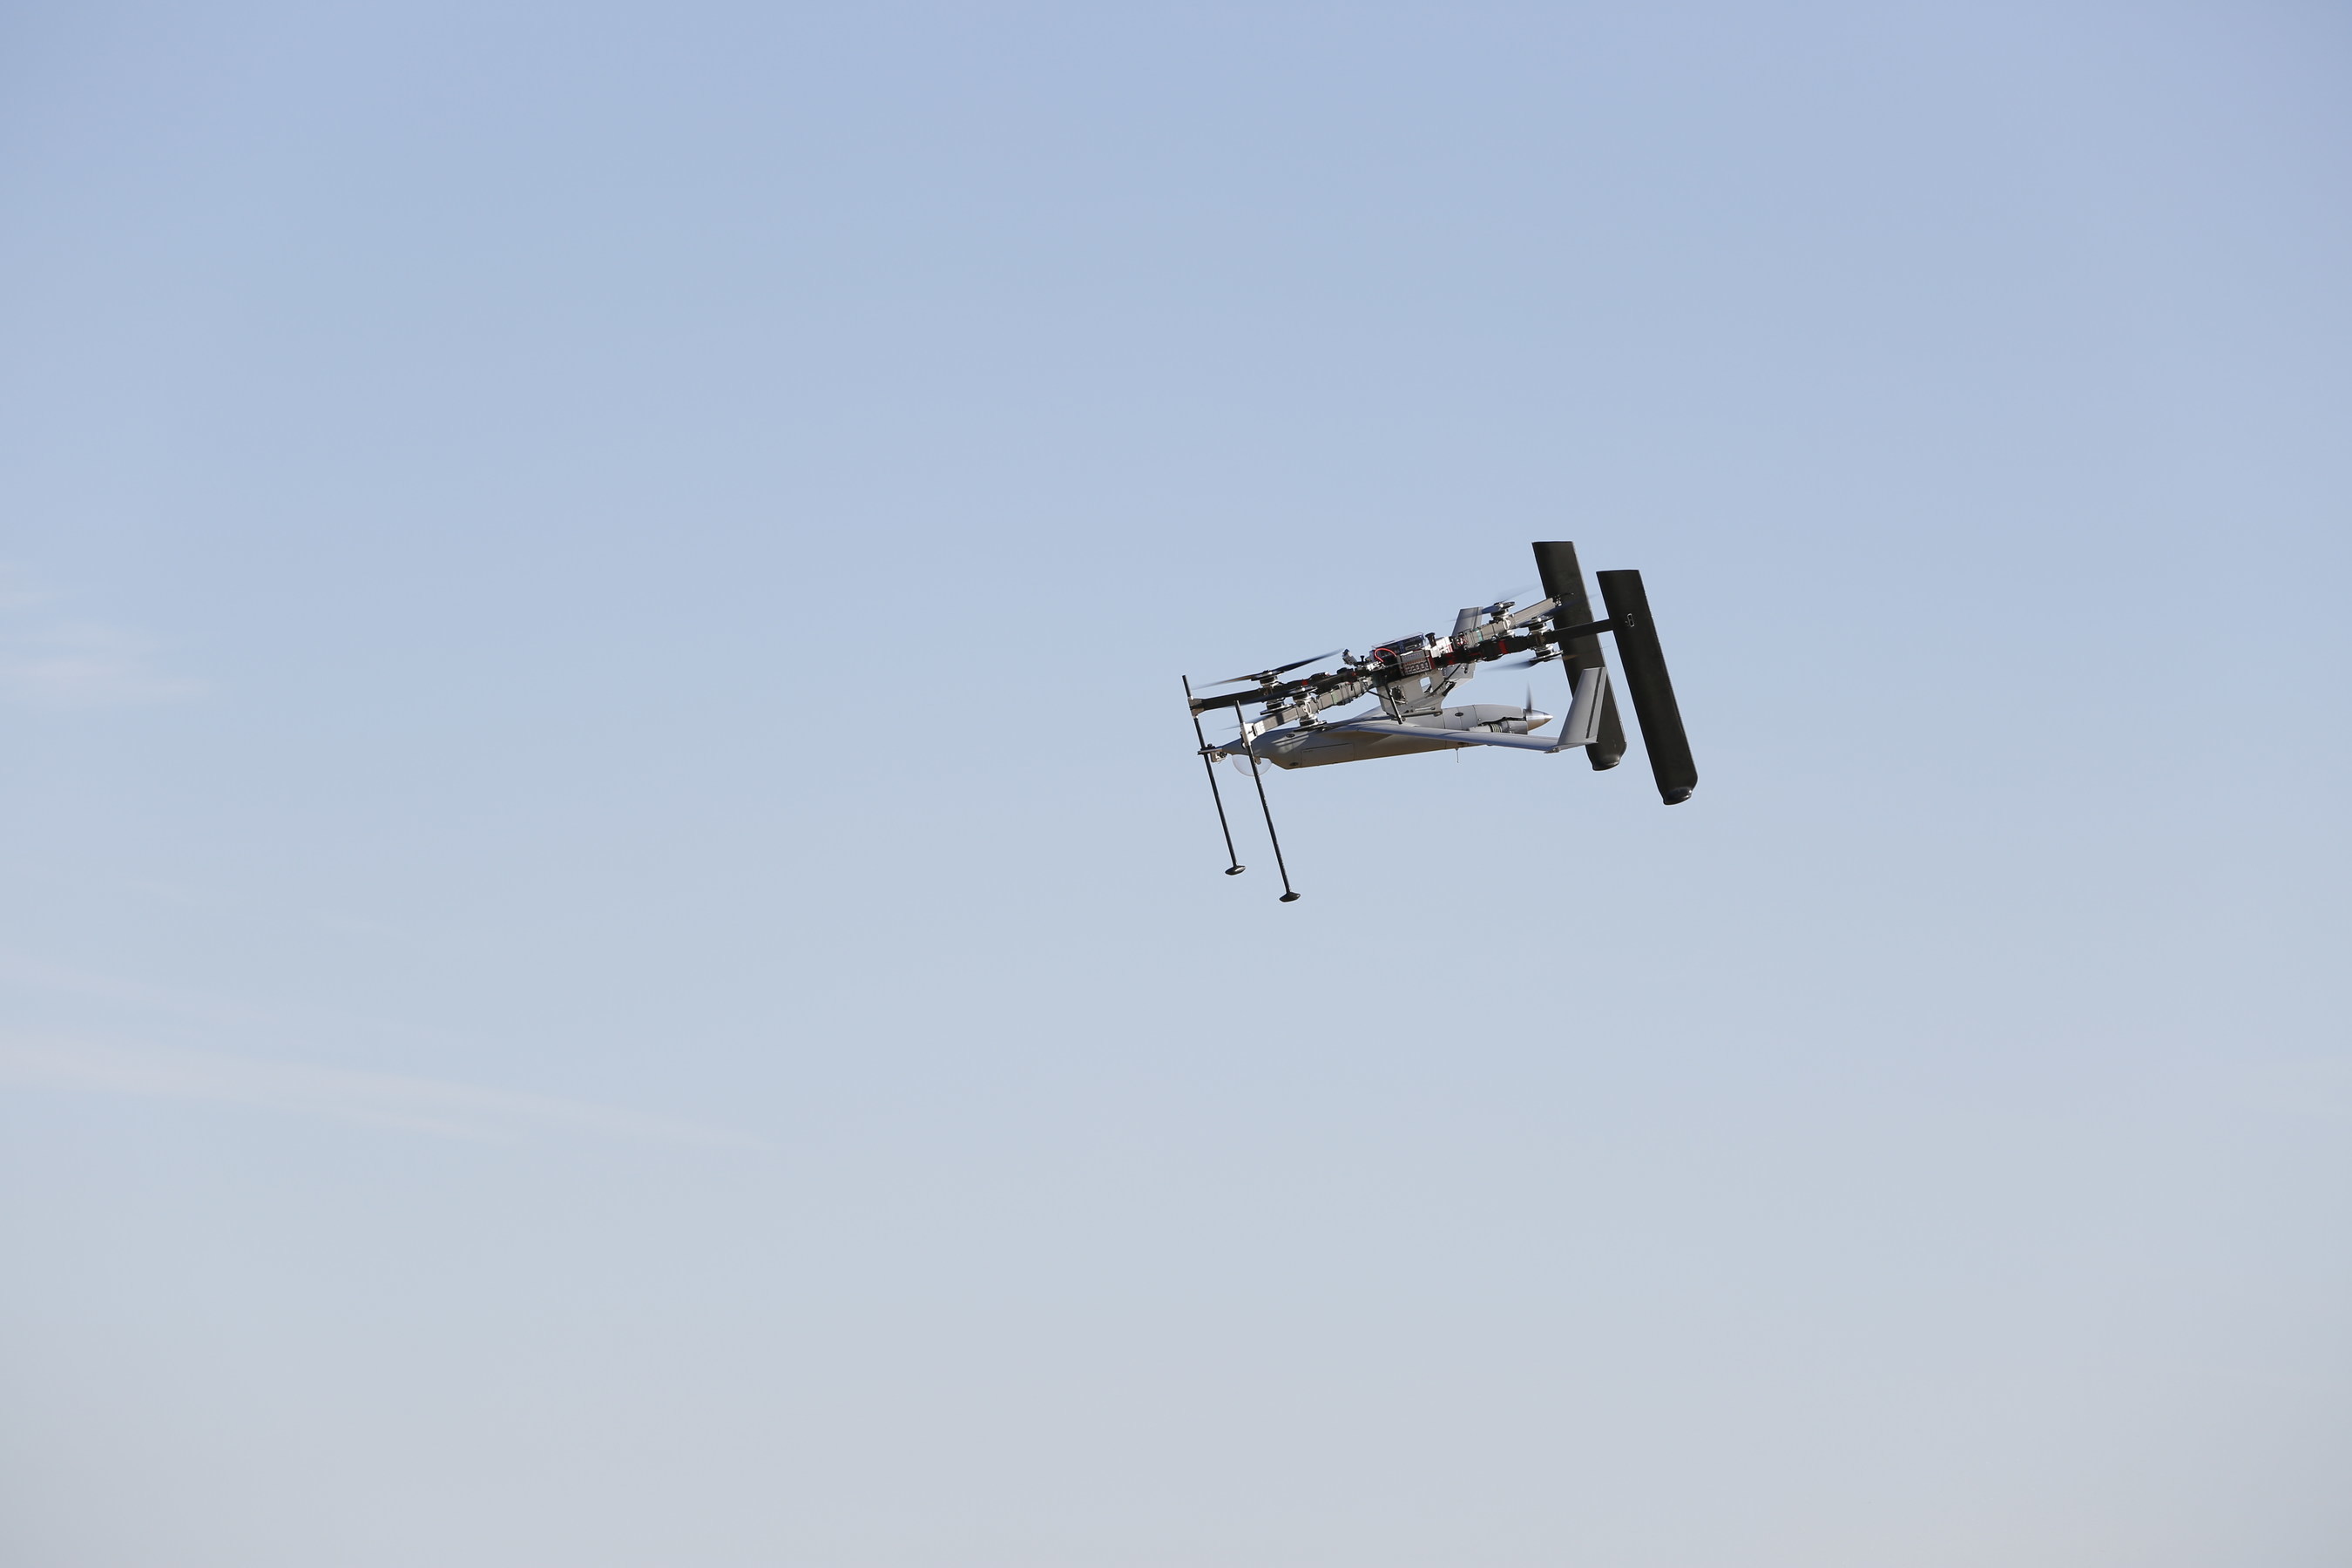 Insitu's new Flying Launch and Recovery System launches ScanEagle from the air and captures without ground equipment